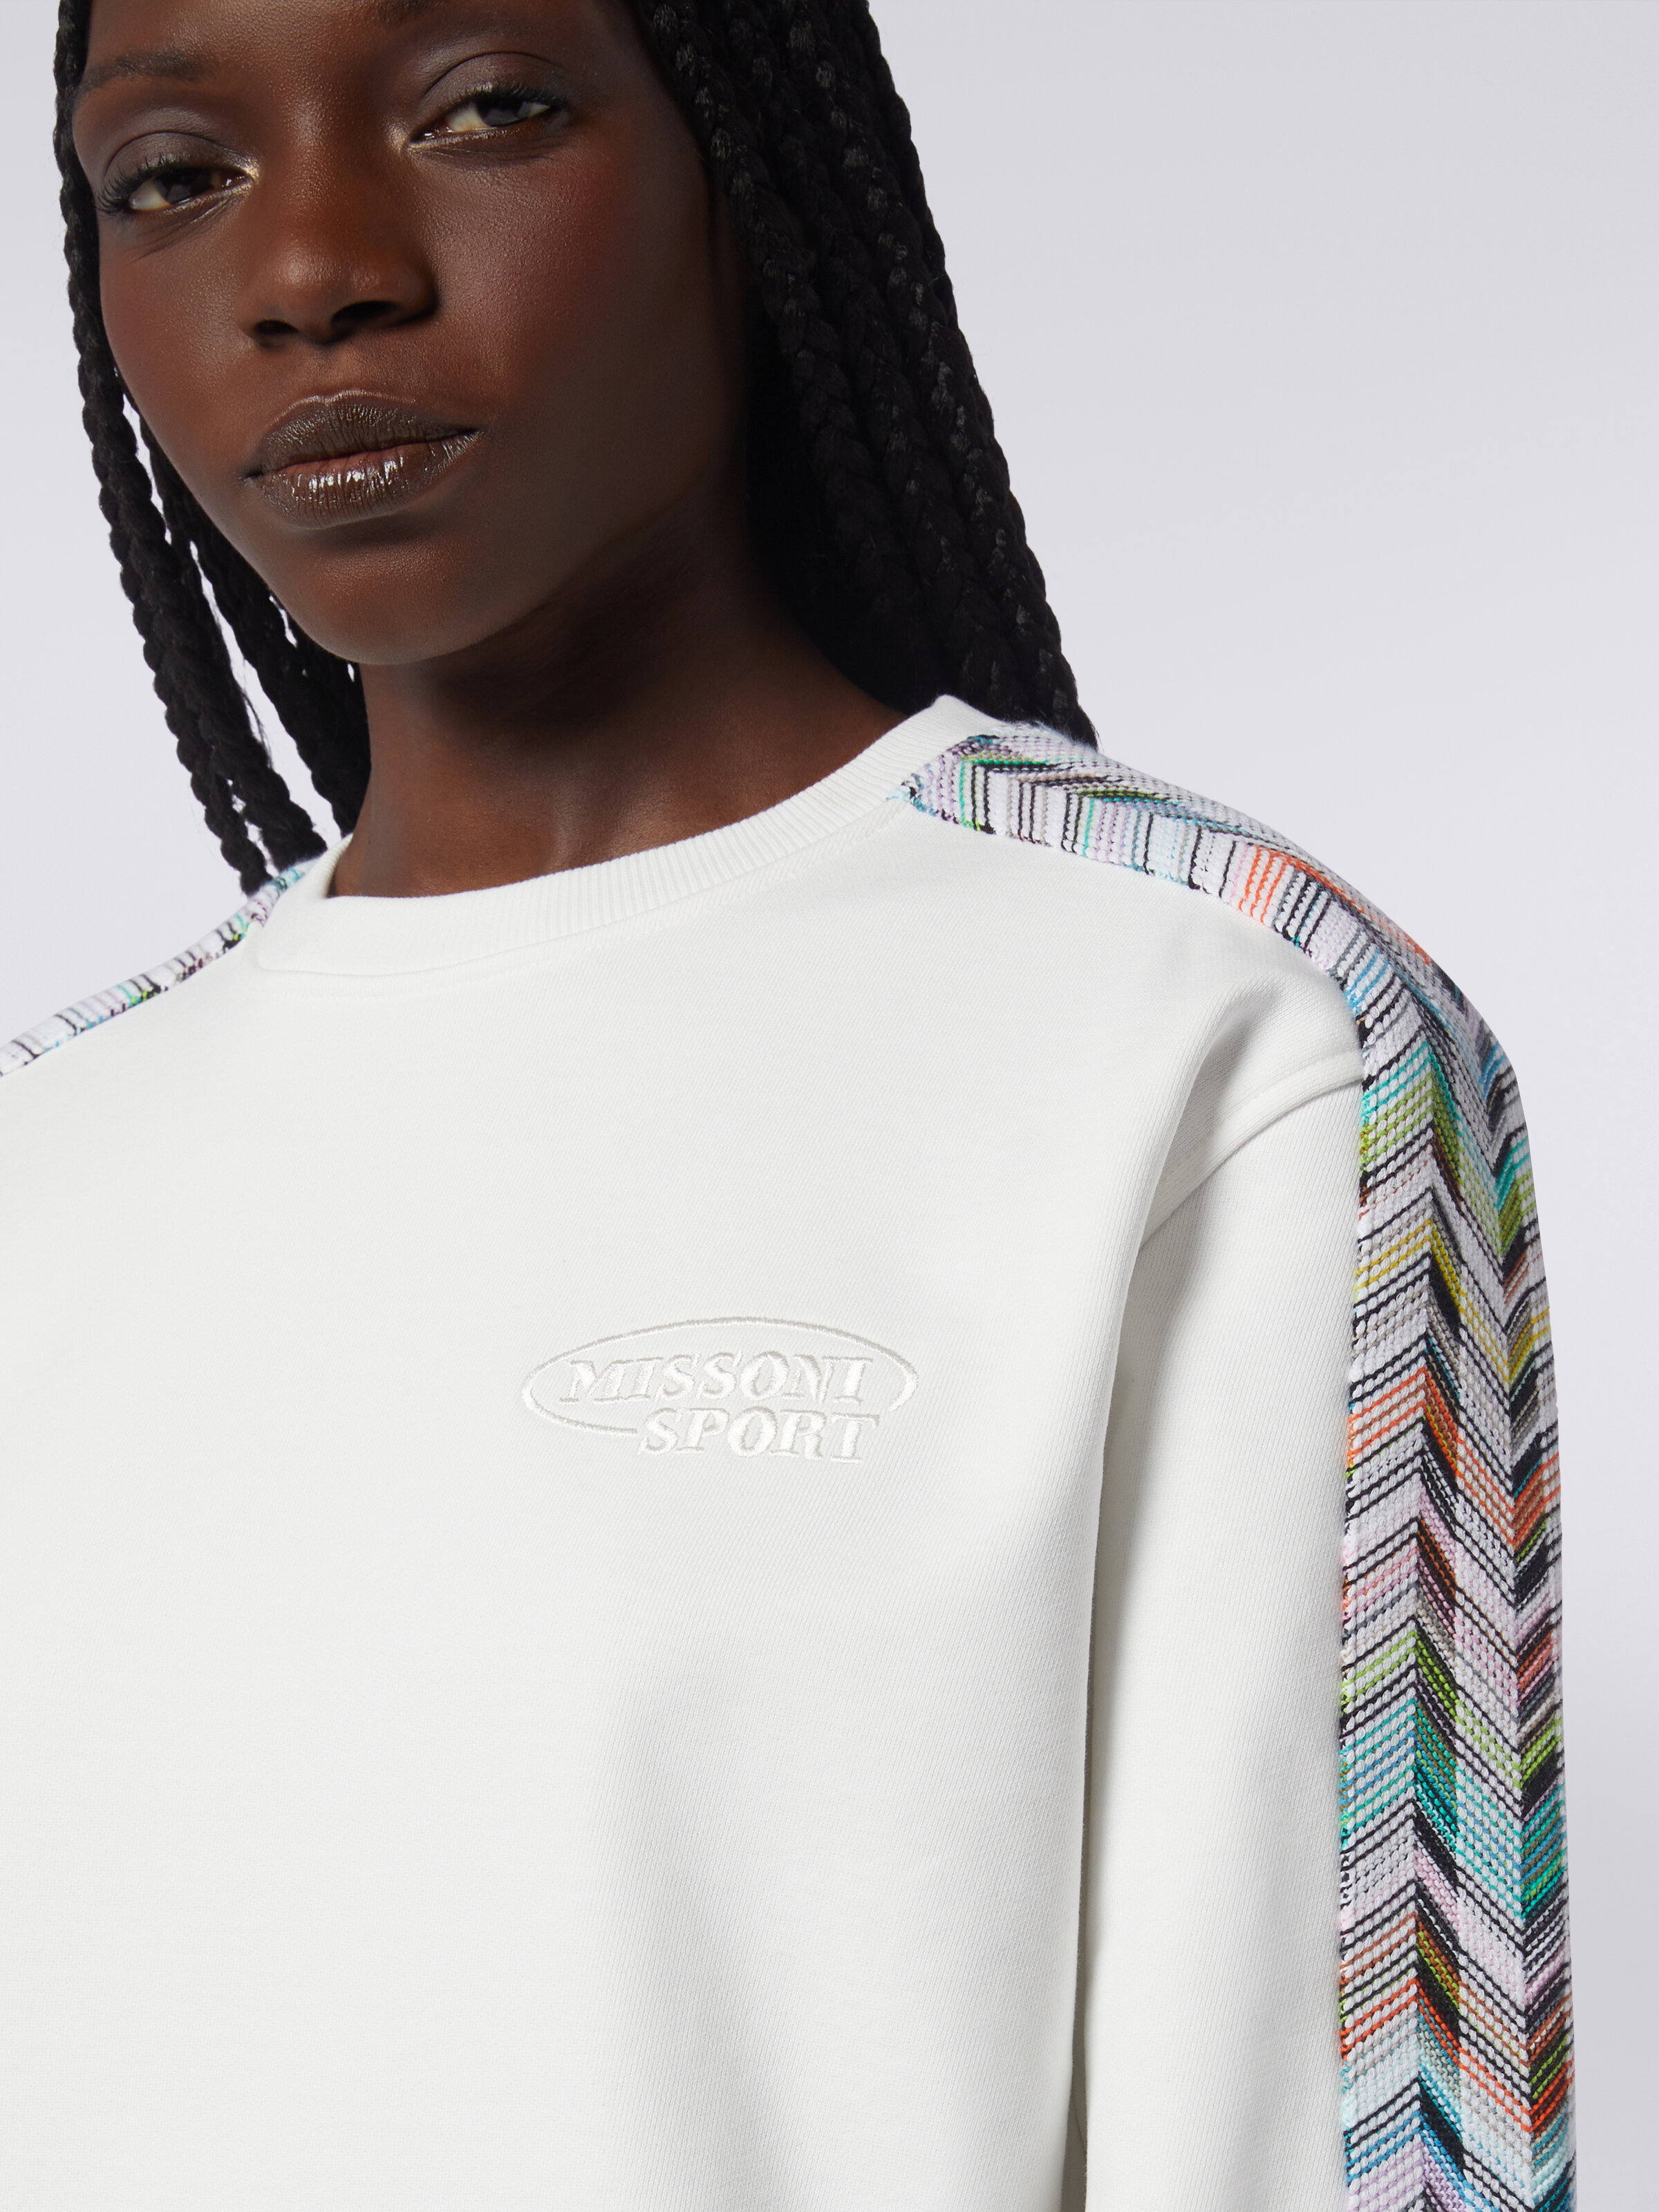 Crew-neck sweatshirt with logo and knitted details, Multicoloured  - 4